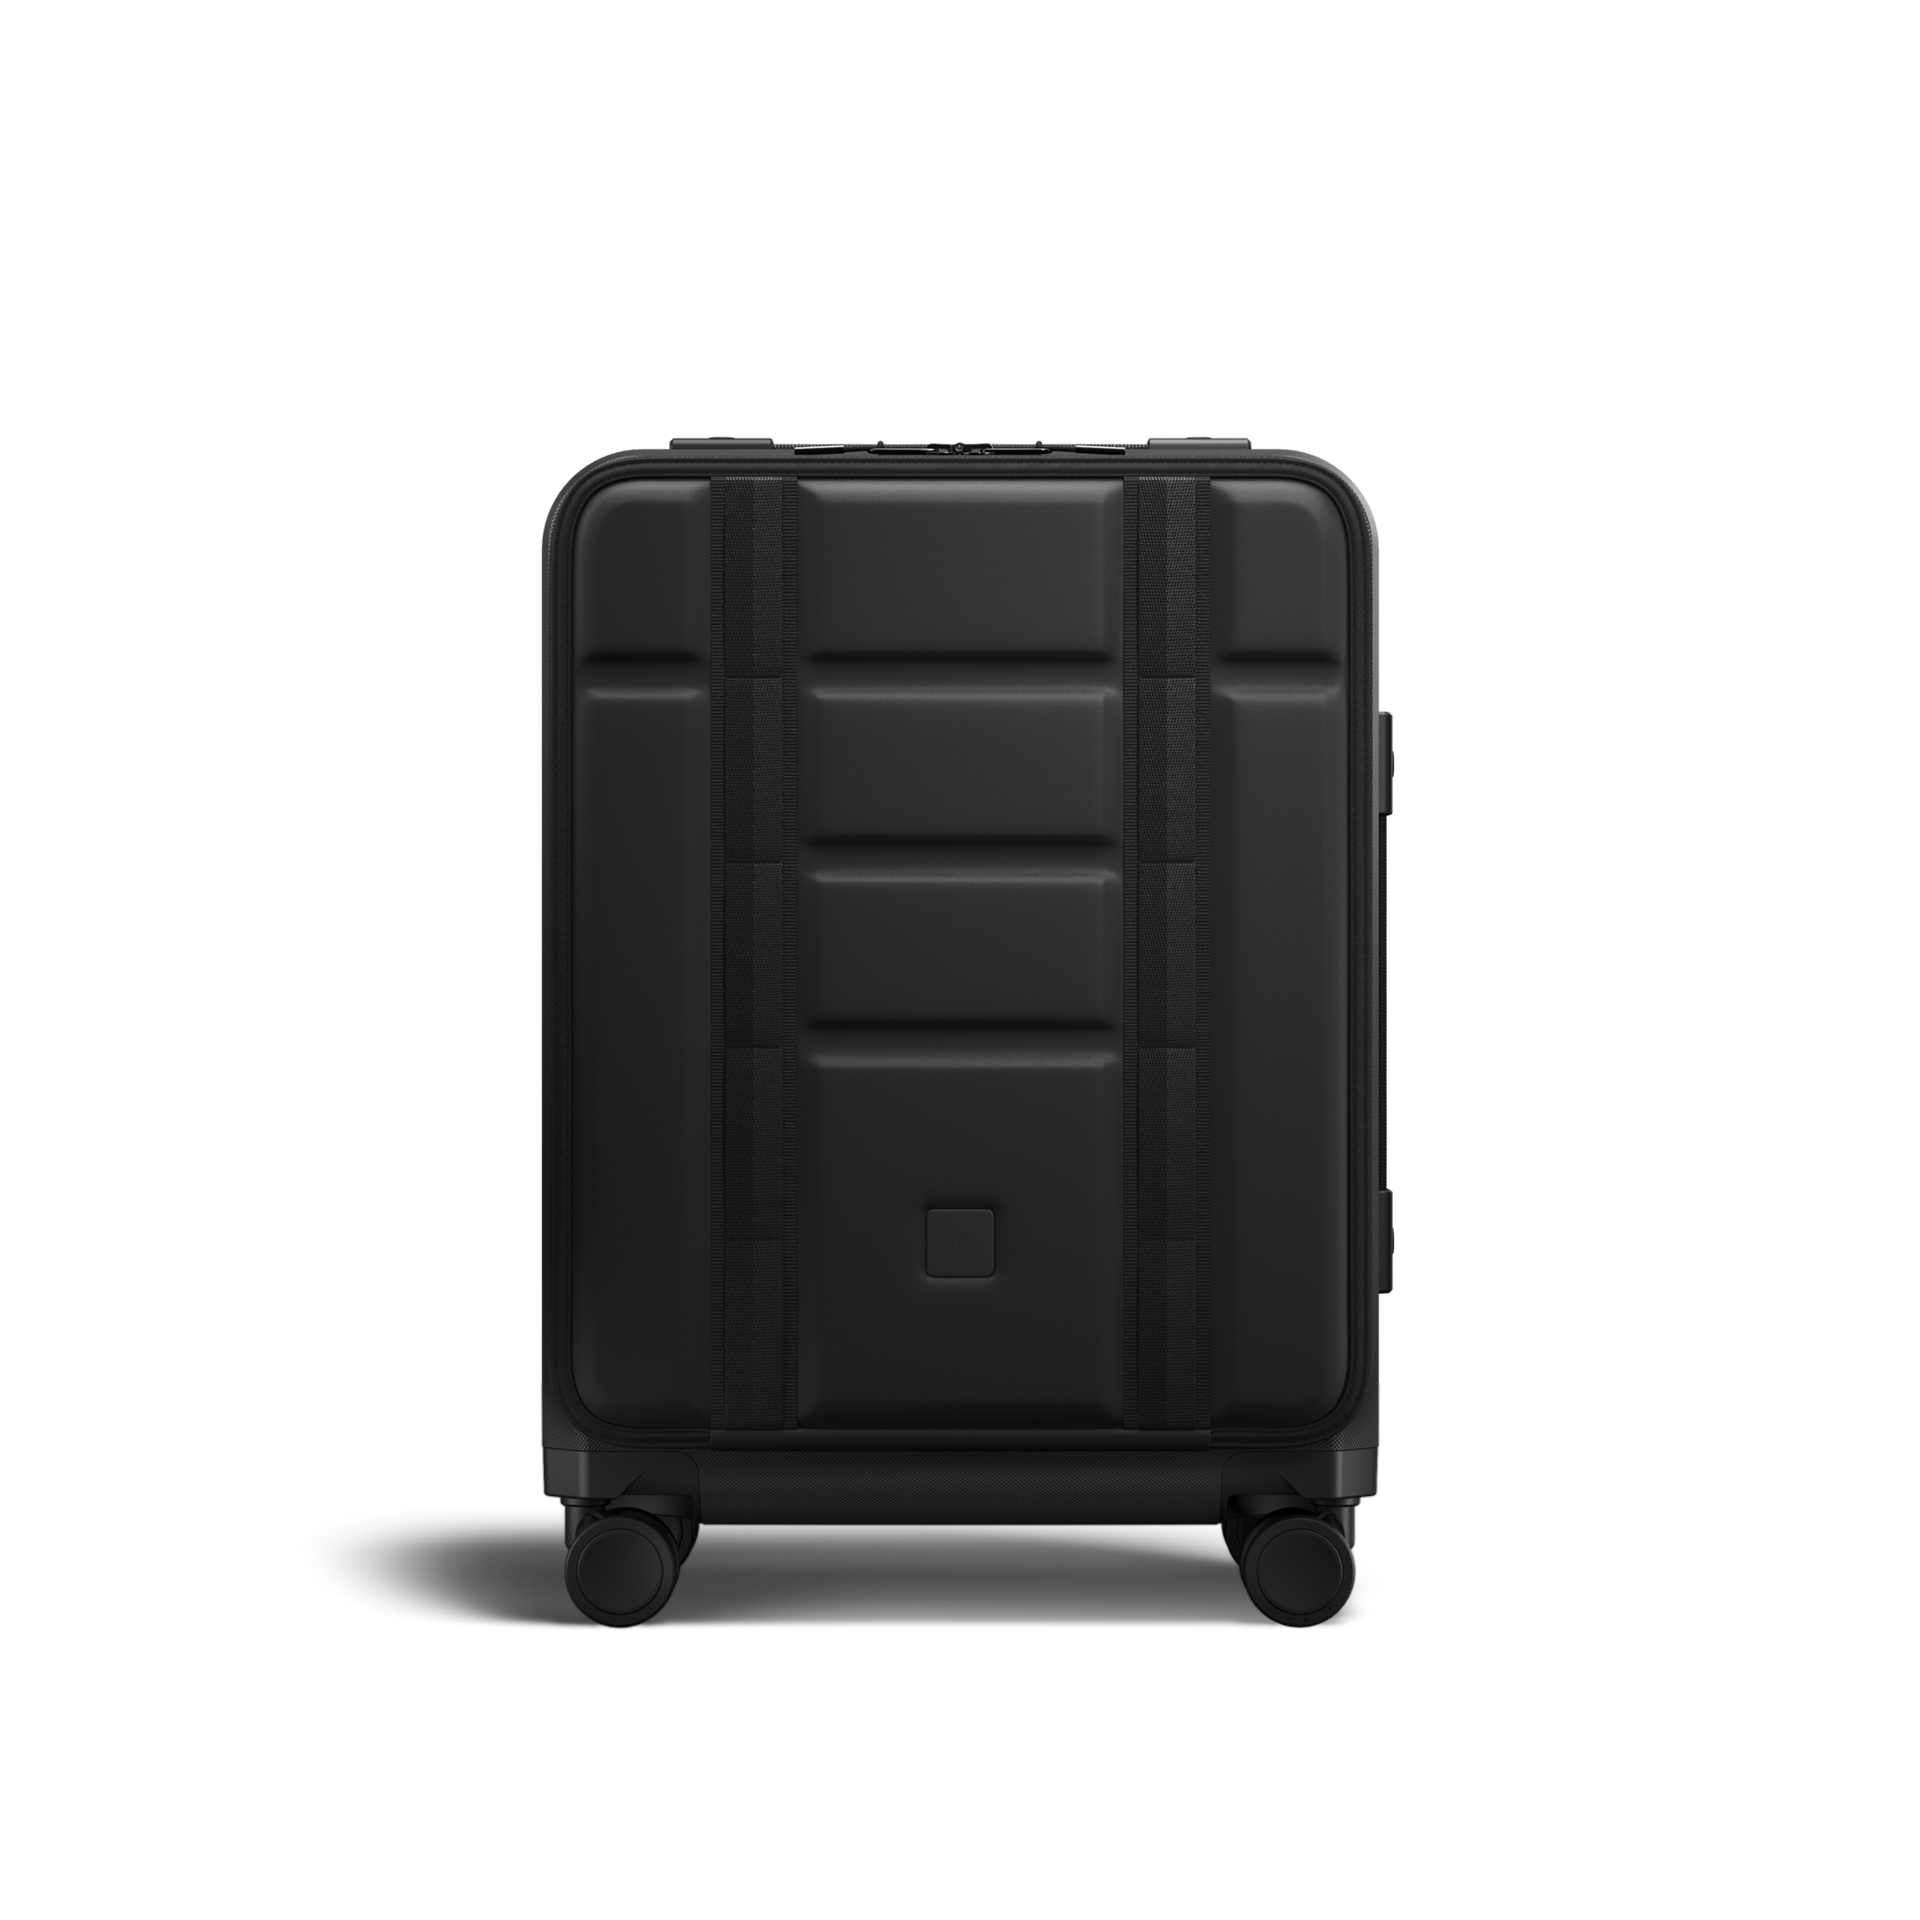 DB The Ramverk Pro Front-Acces Cabin Luggage - Black Out Handbagage Koffer - Reisartikelen-nl